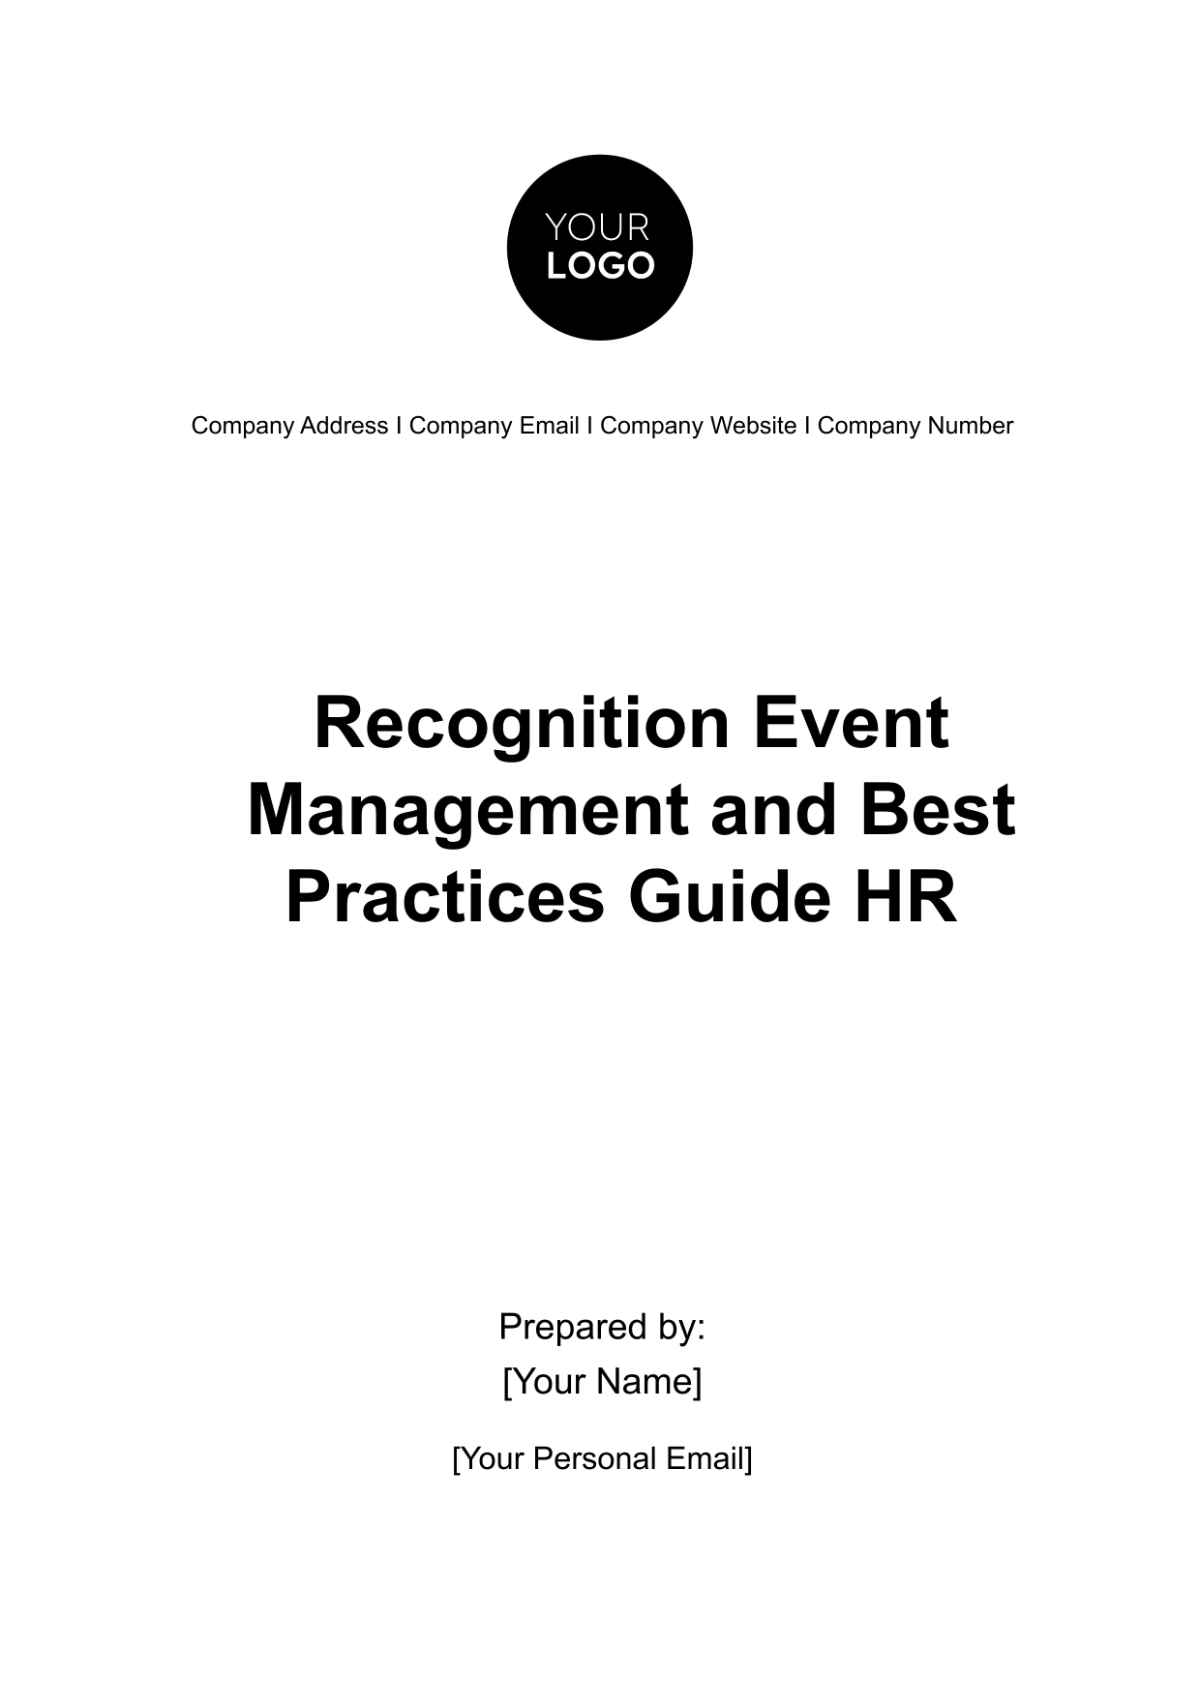 Free Recognition Event Management and Best Practices Guide HR Template